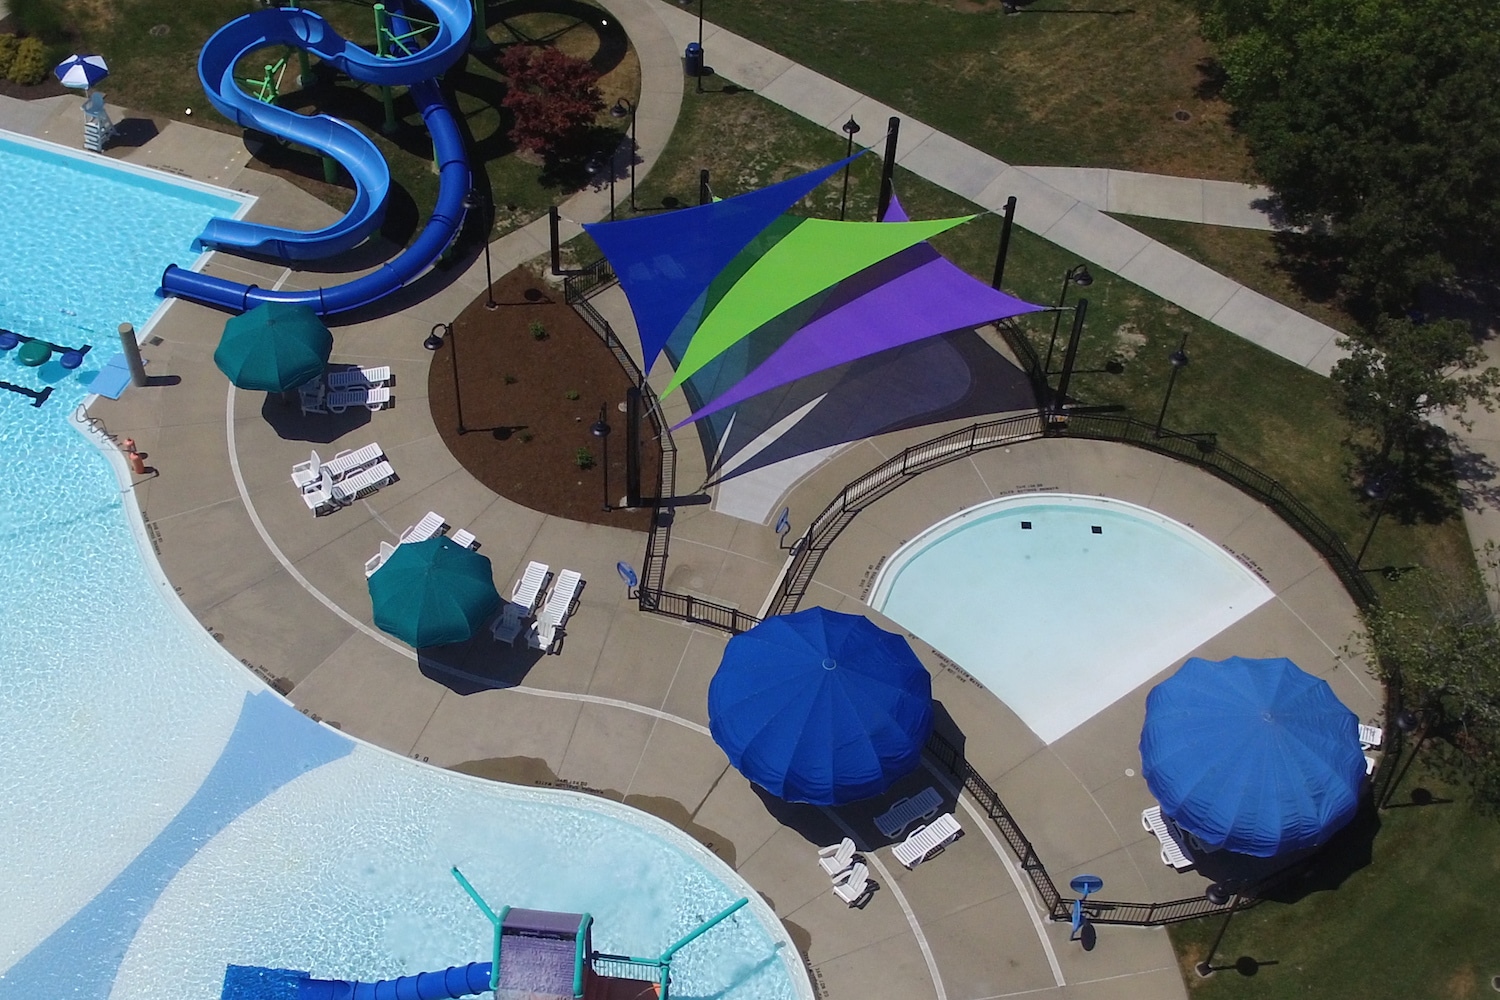 Blue, green and purple triangular shade sails overlap each other at a water park.